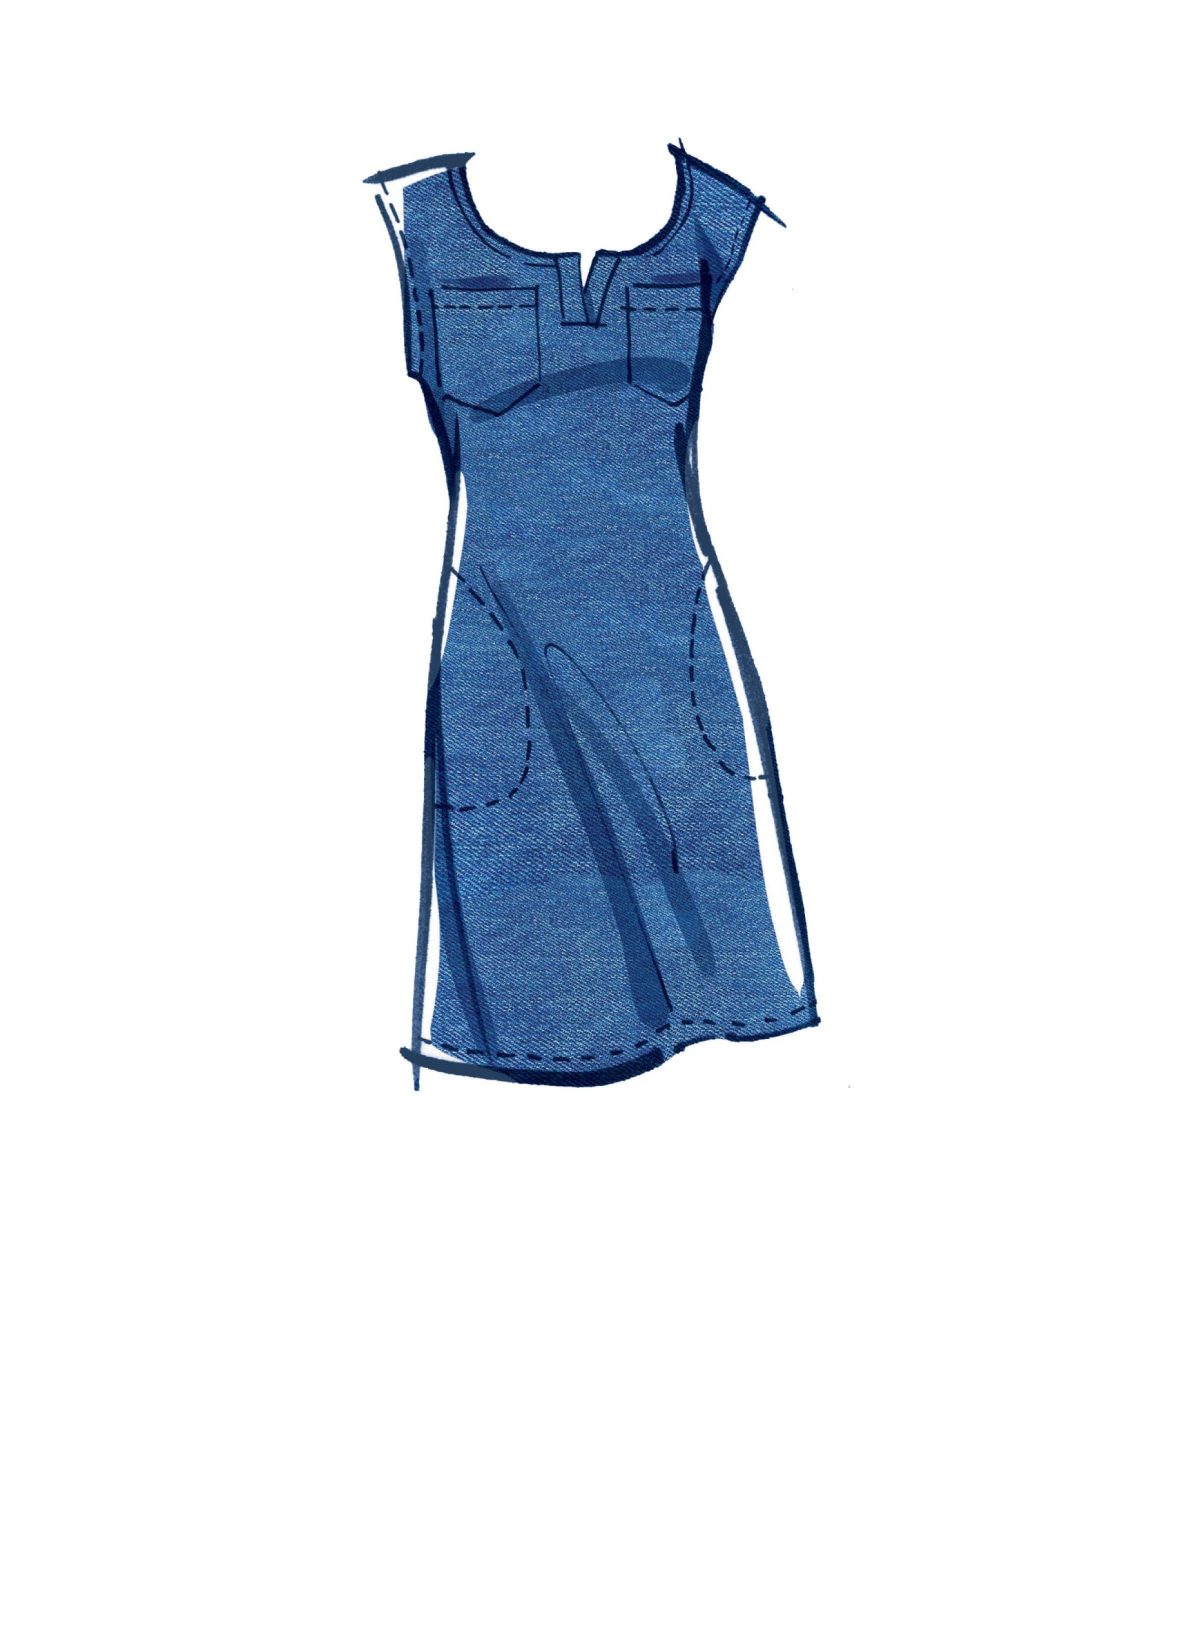 McCall's Sewing Pattern M8164 Misses' Dresses With Sleeve Ties, Pocket Variations and Belt #RobinMcCalls